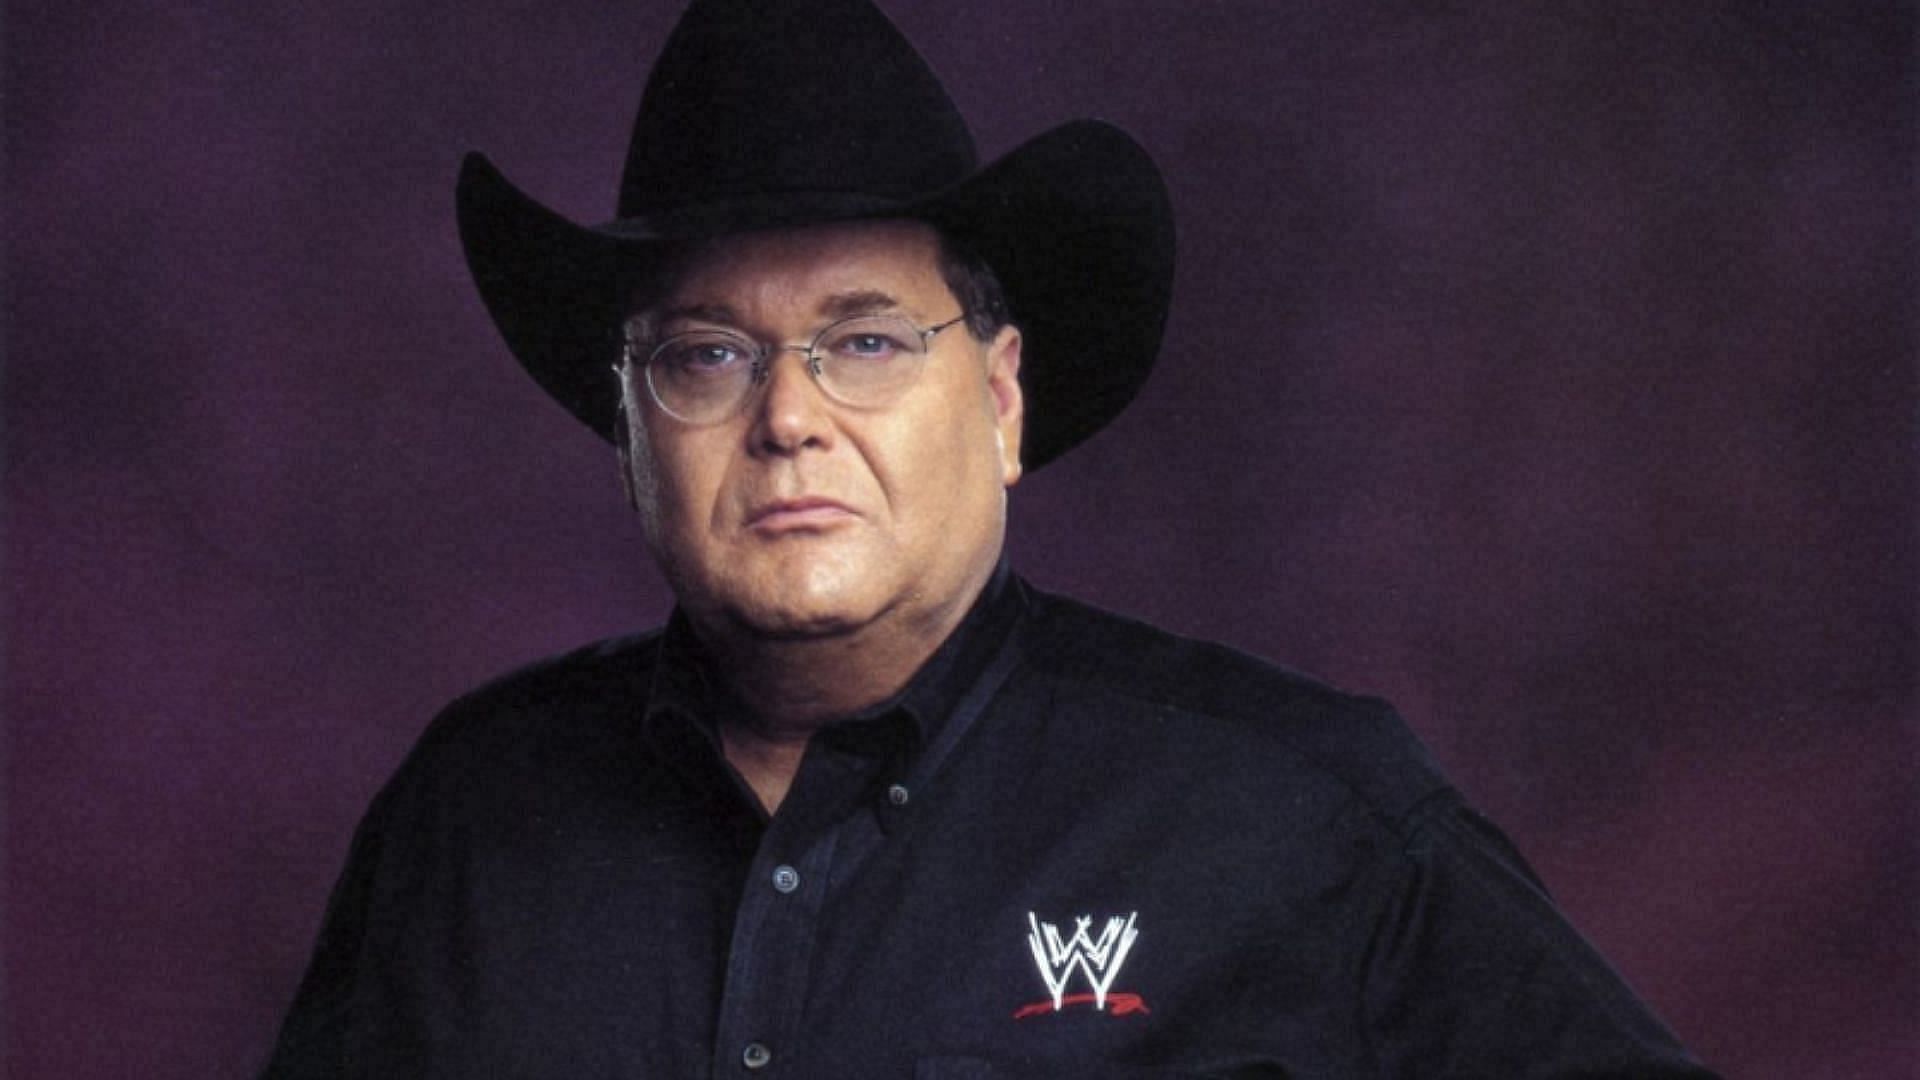 Former WWE commentator and executive Jim Ross